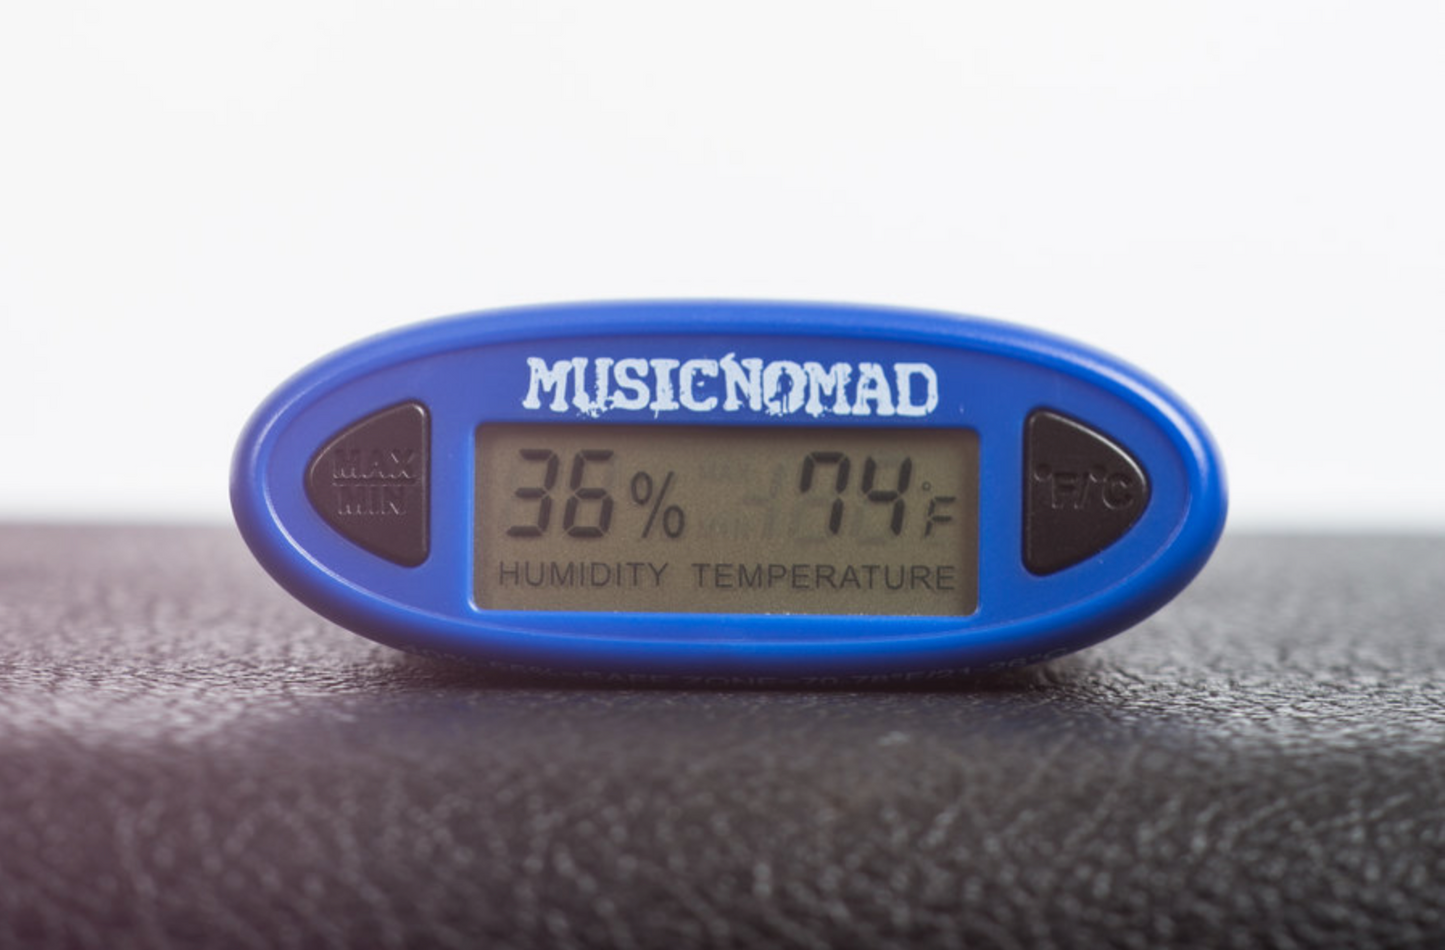 Music Nomad Guitar Humidifier & Humidity-Temperature Monitor Pak S/N: MN306